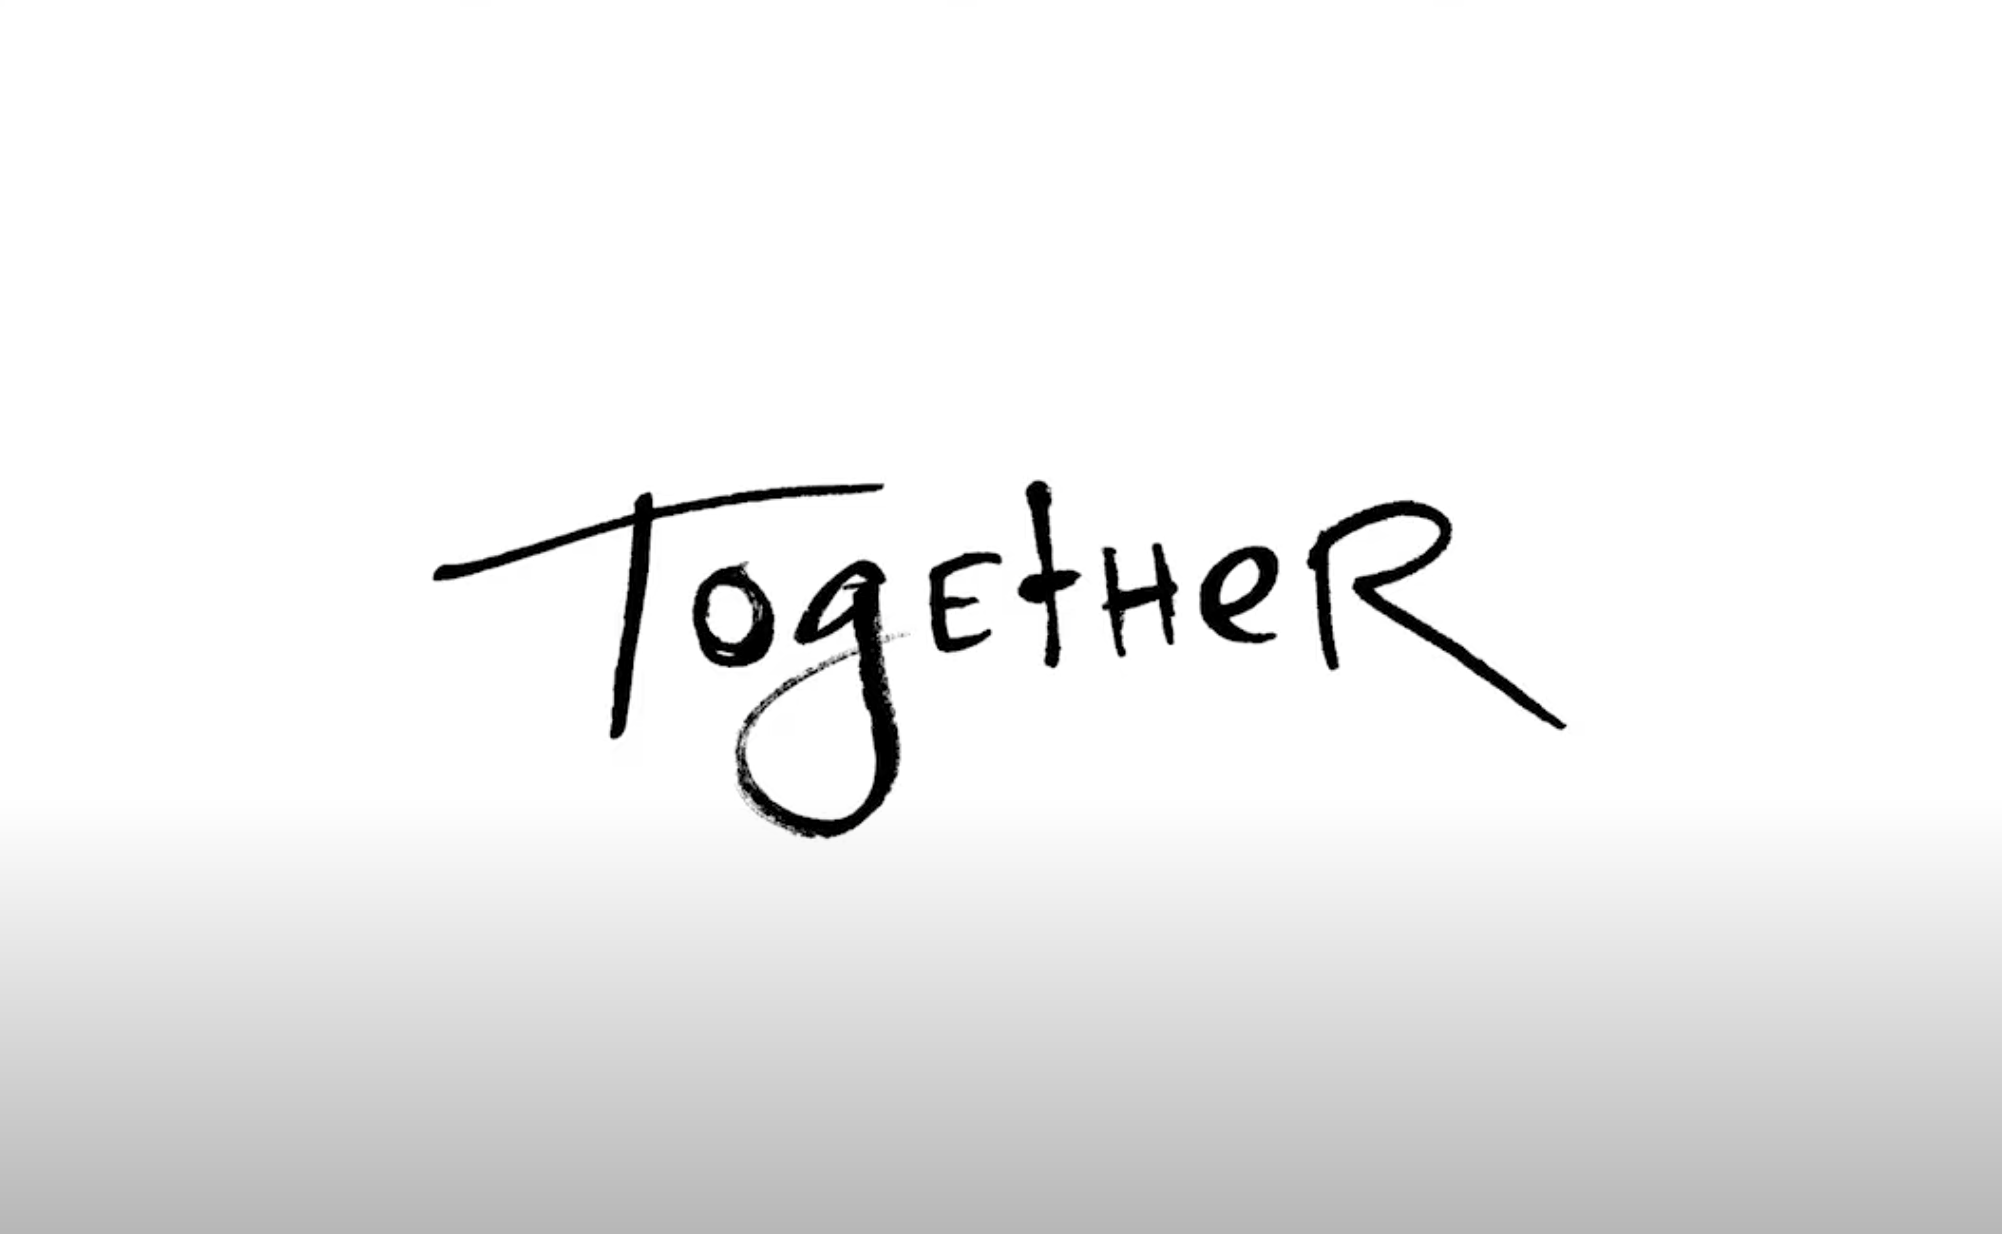 the word together